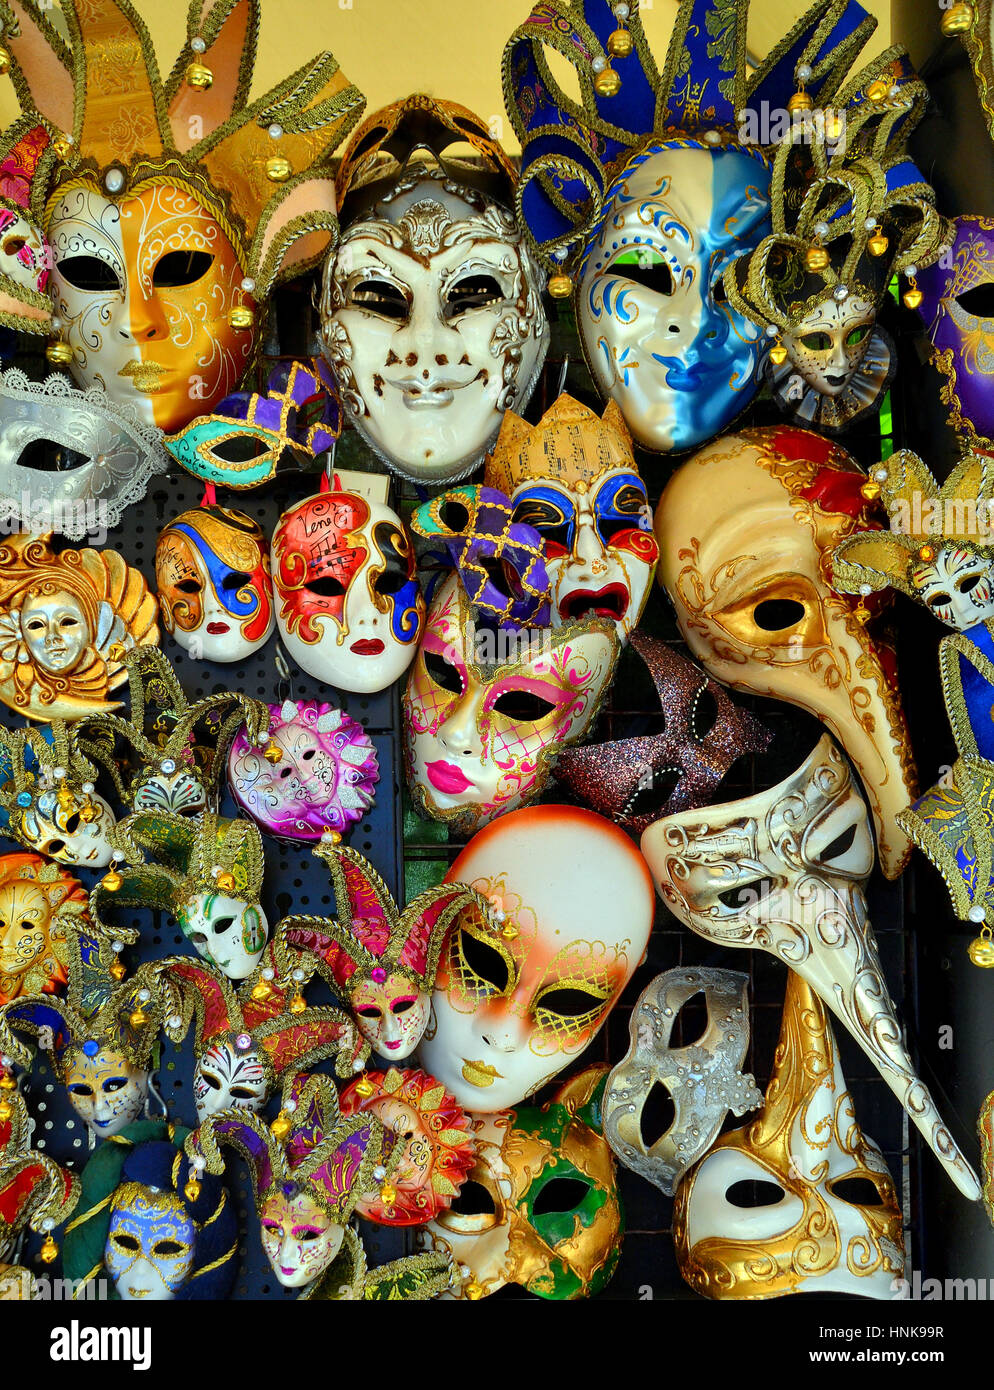 A shop's display of a variety of Venetian carnival masks in varying sizes and types. Stock Photo